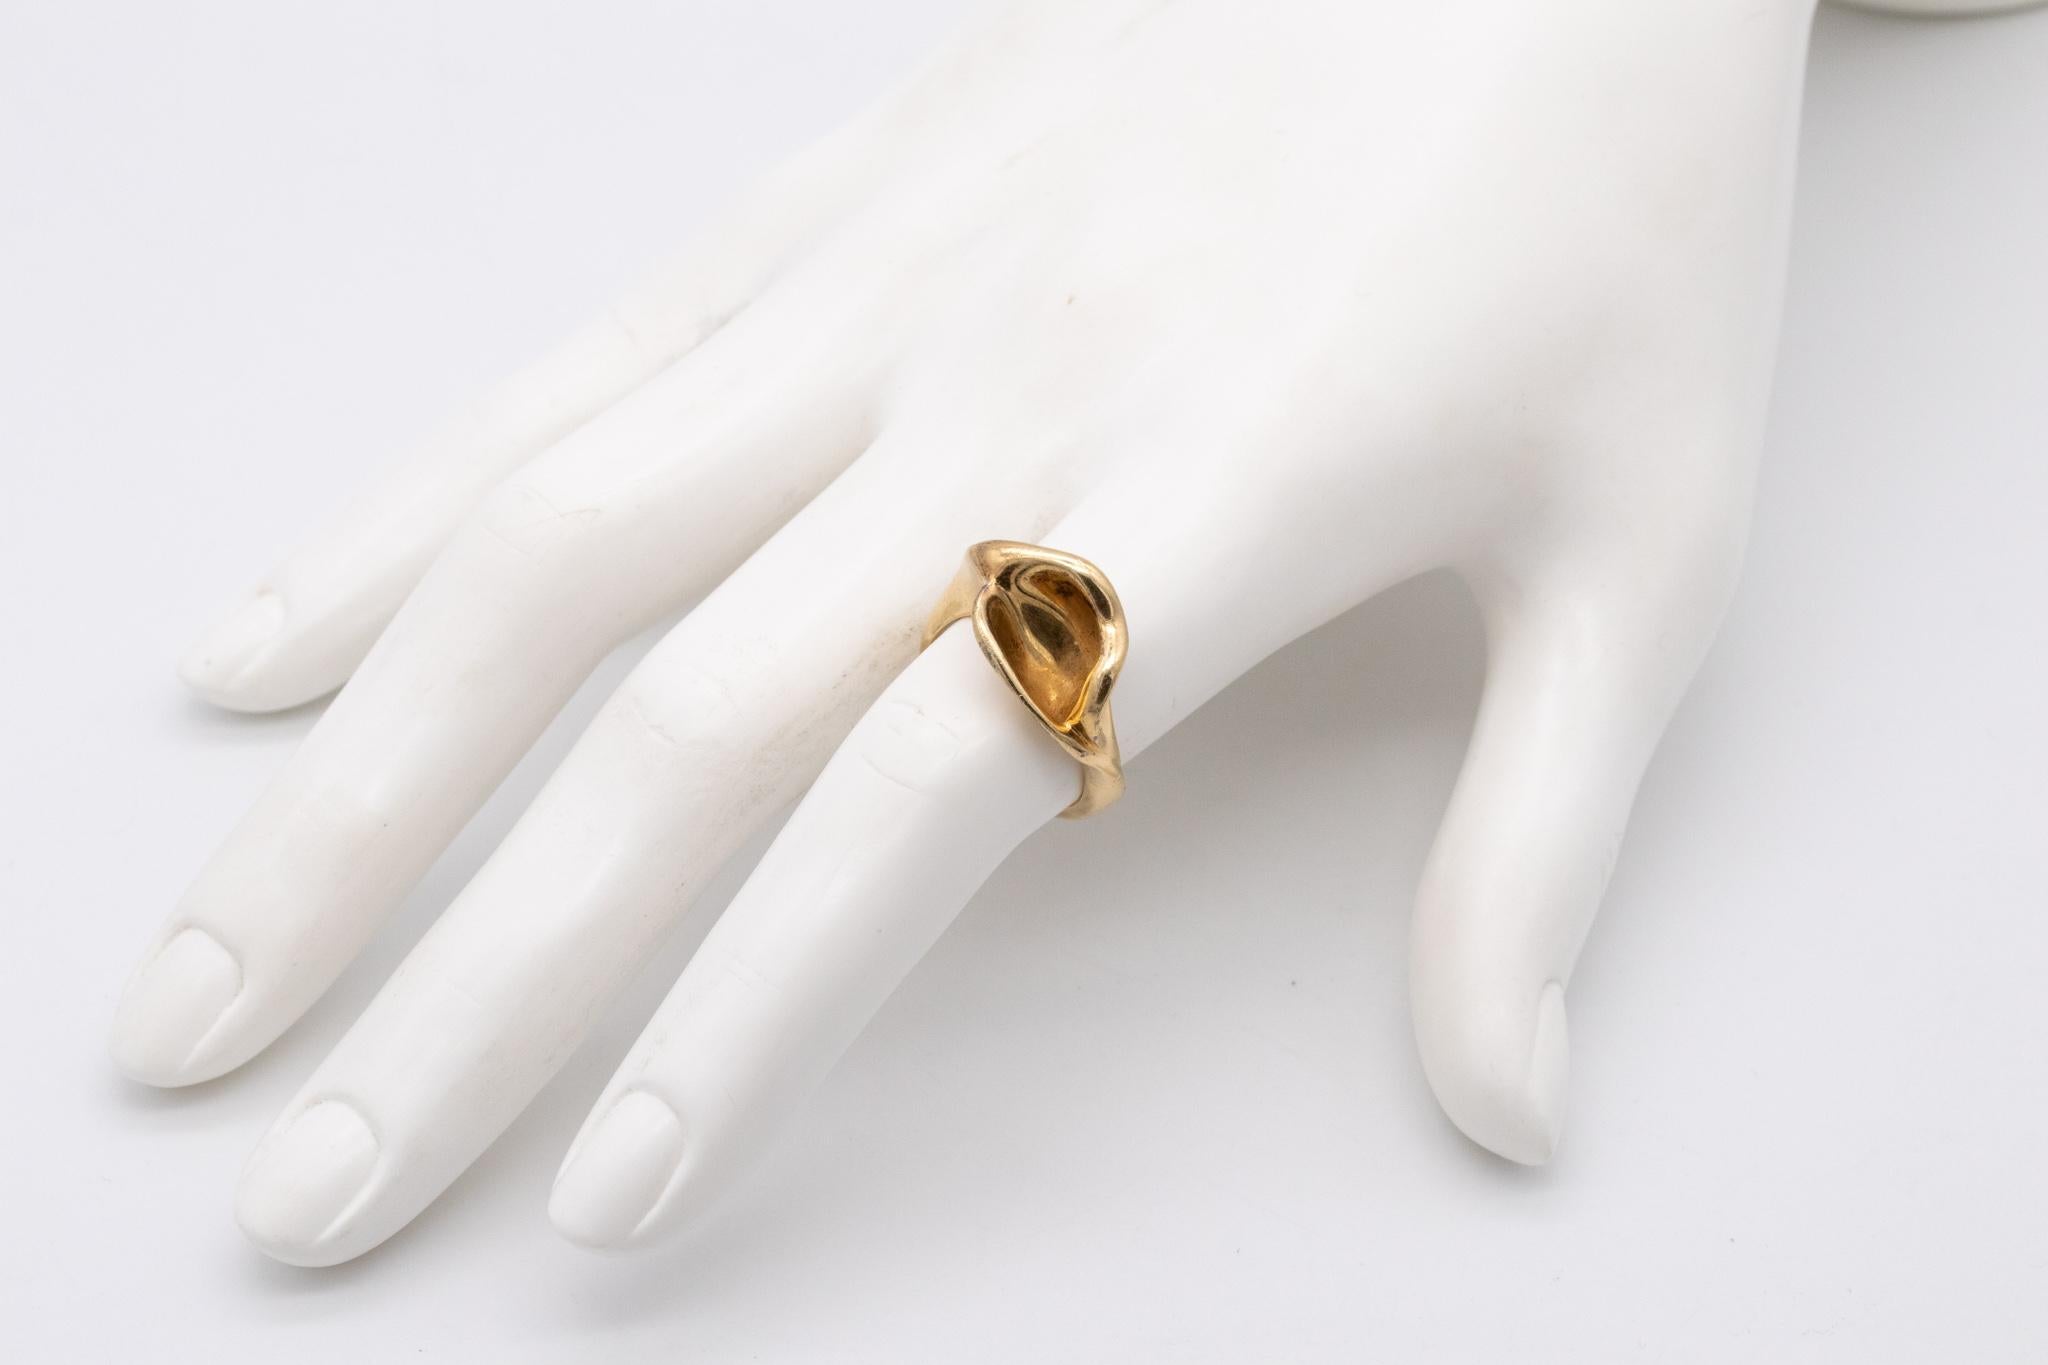 Rare ring designed by Elsa Peretti (1940-2021) for Tiffany & Co.

An sculptural free form ring designed by Peretti, back in the 1980's in the shape of a calla lily. Is a beautiful abstraction of the flower, crafted in solid 18 karat of high polished